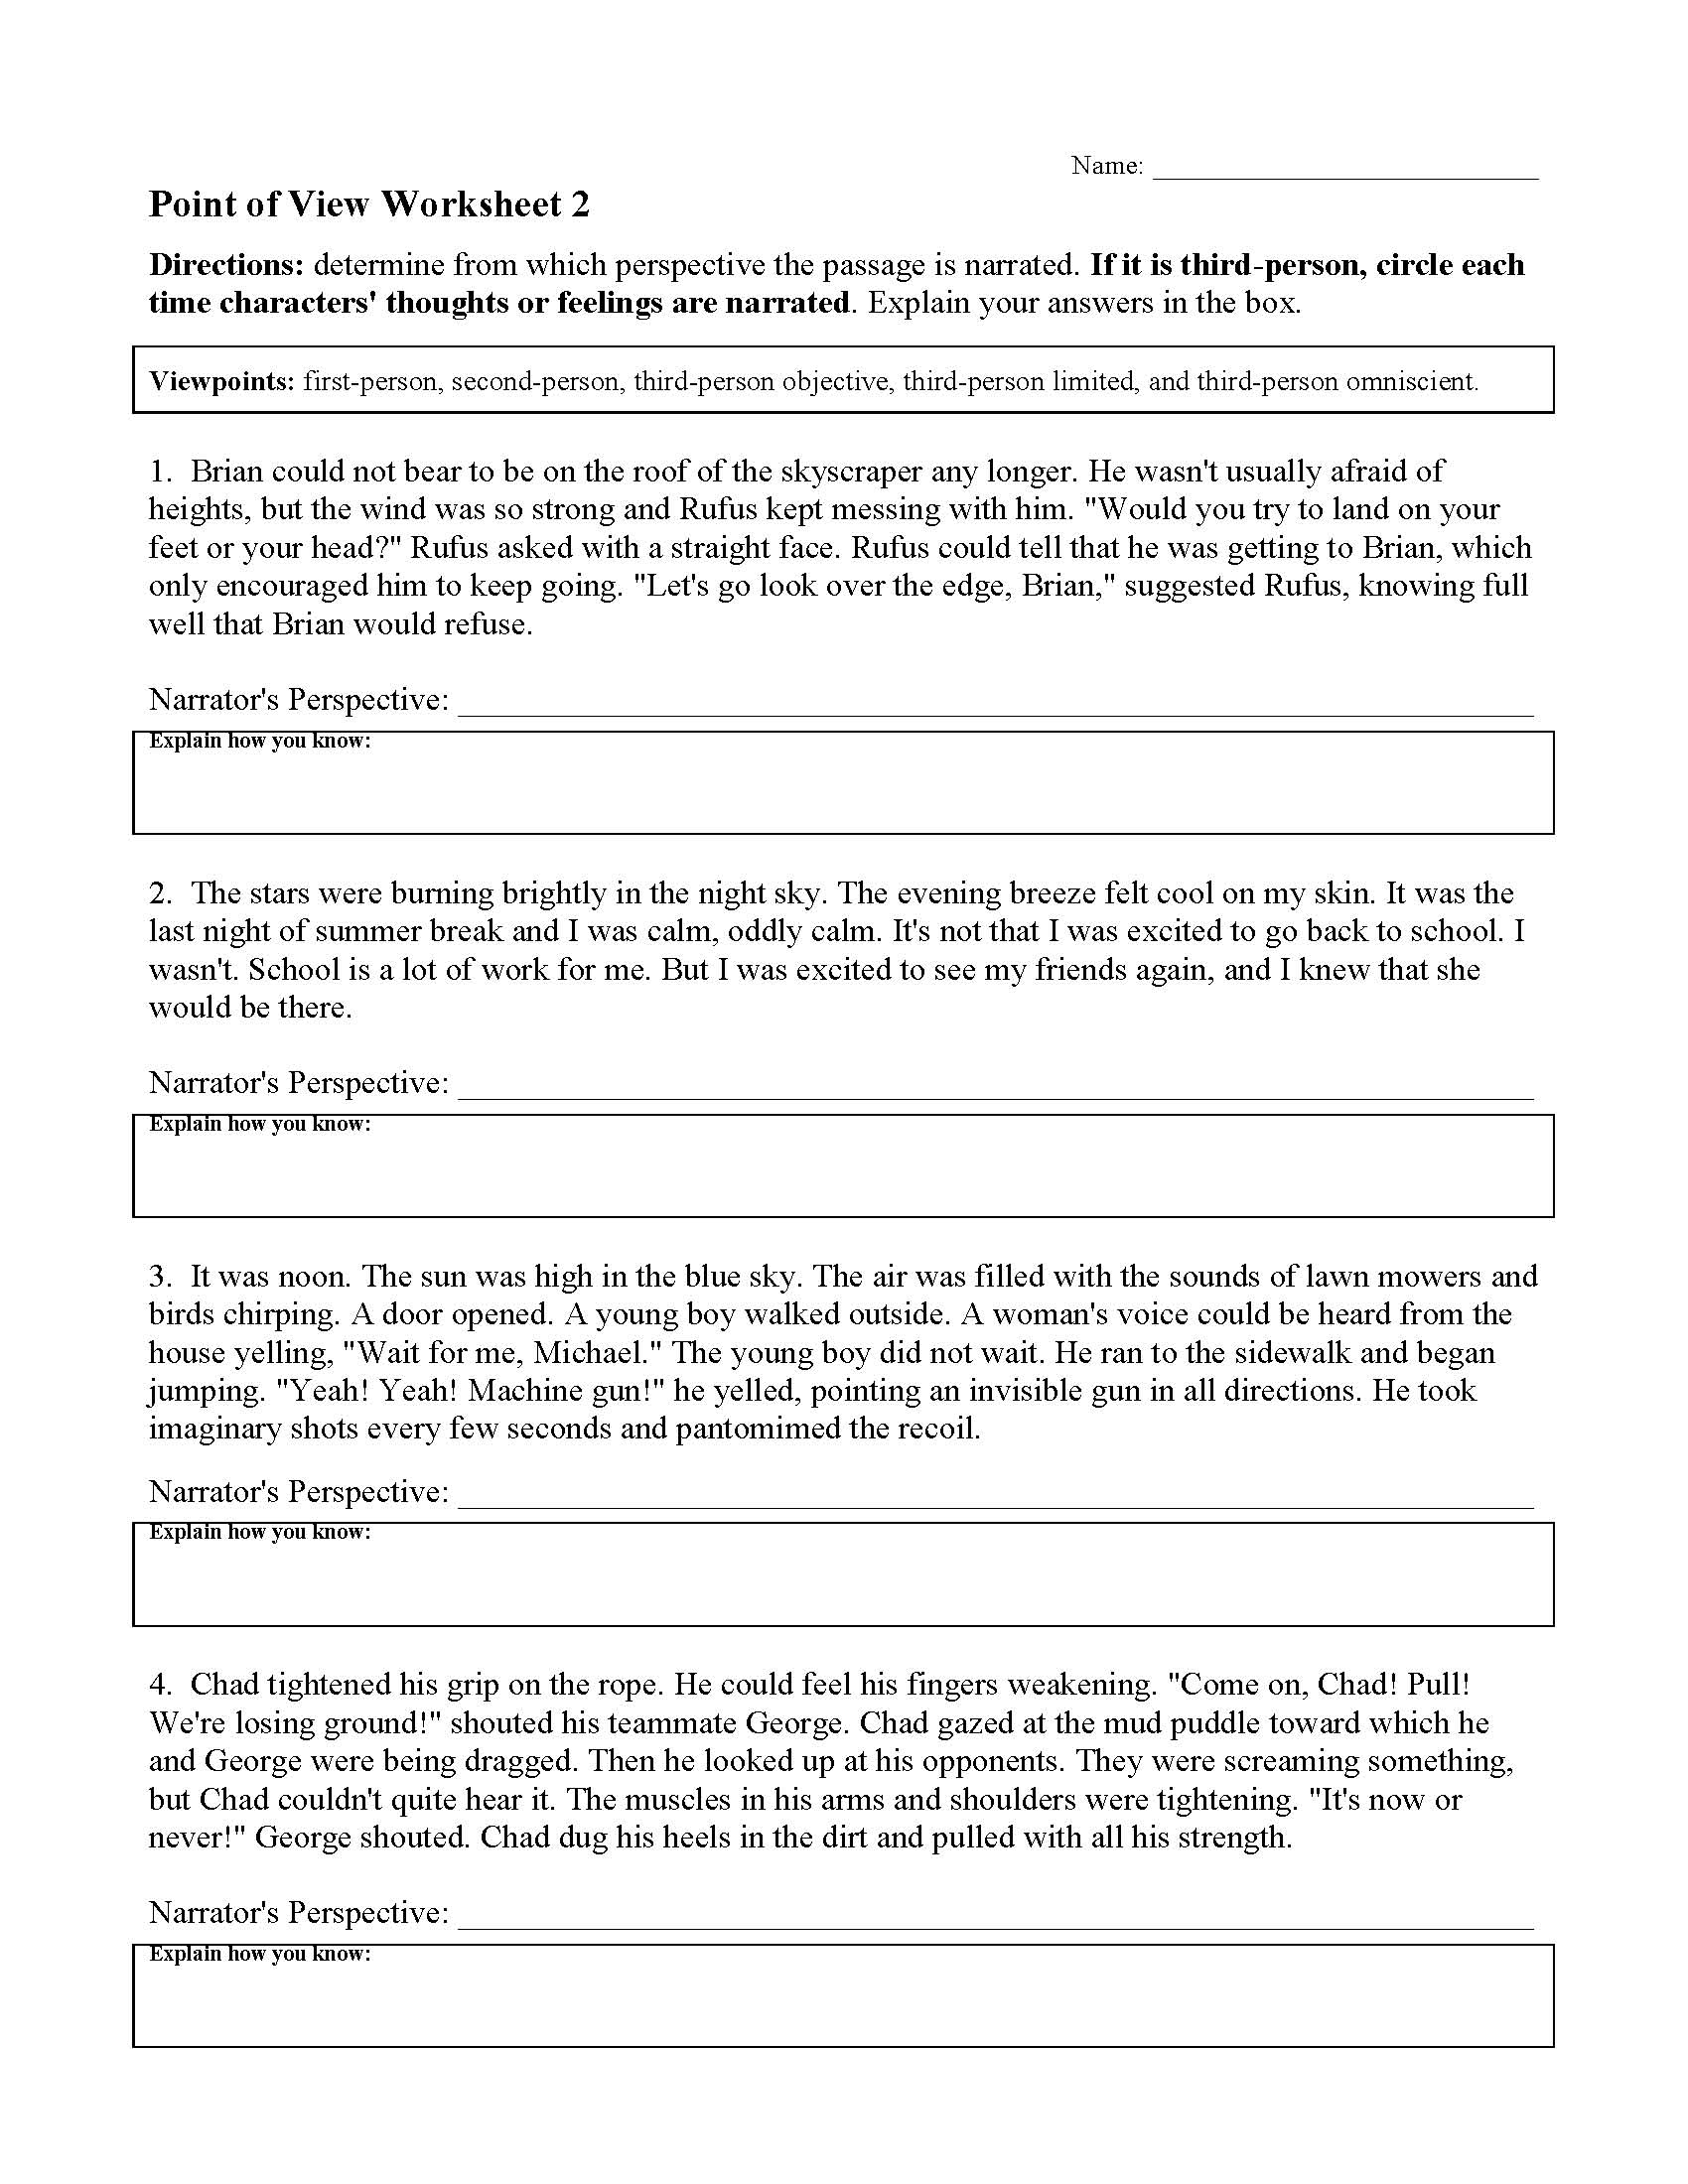 Point Of View Worksheet 2 Preview